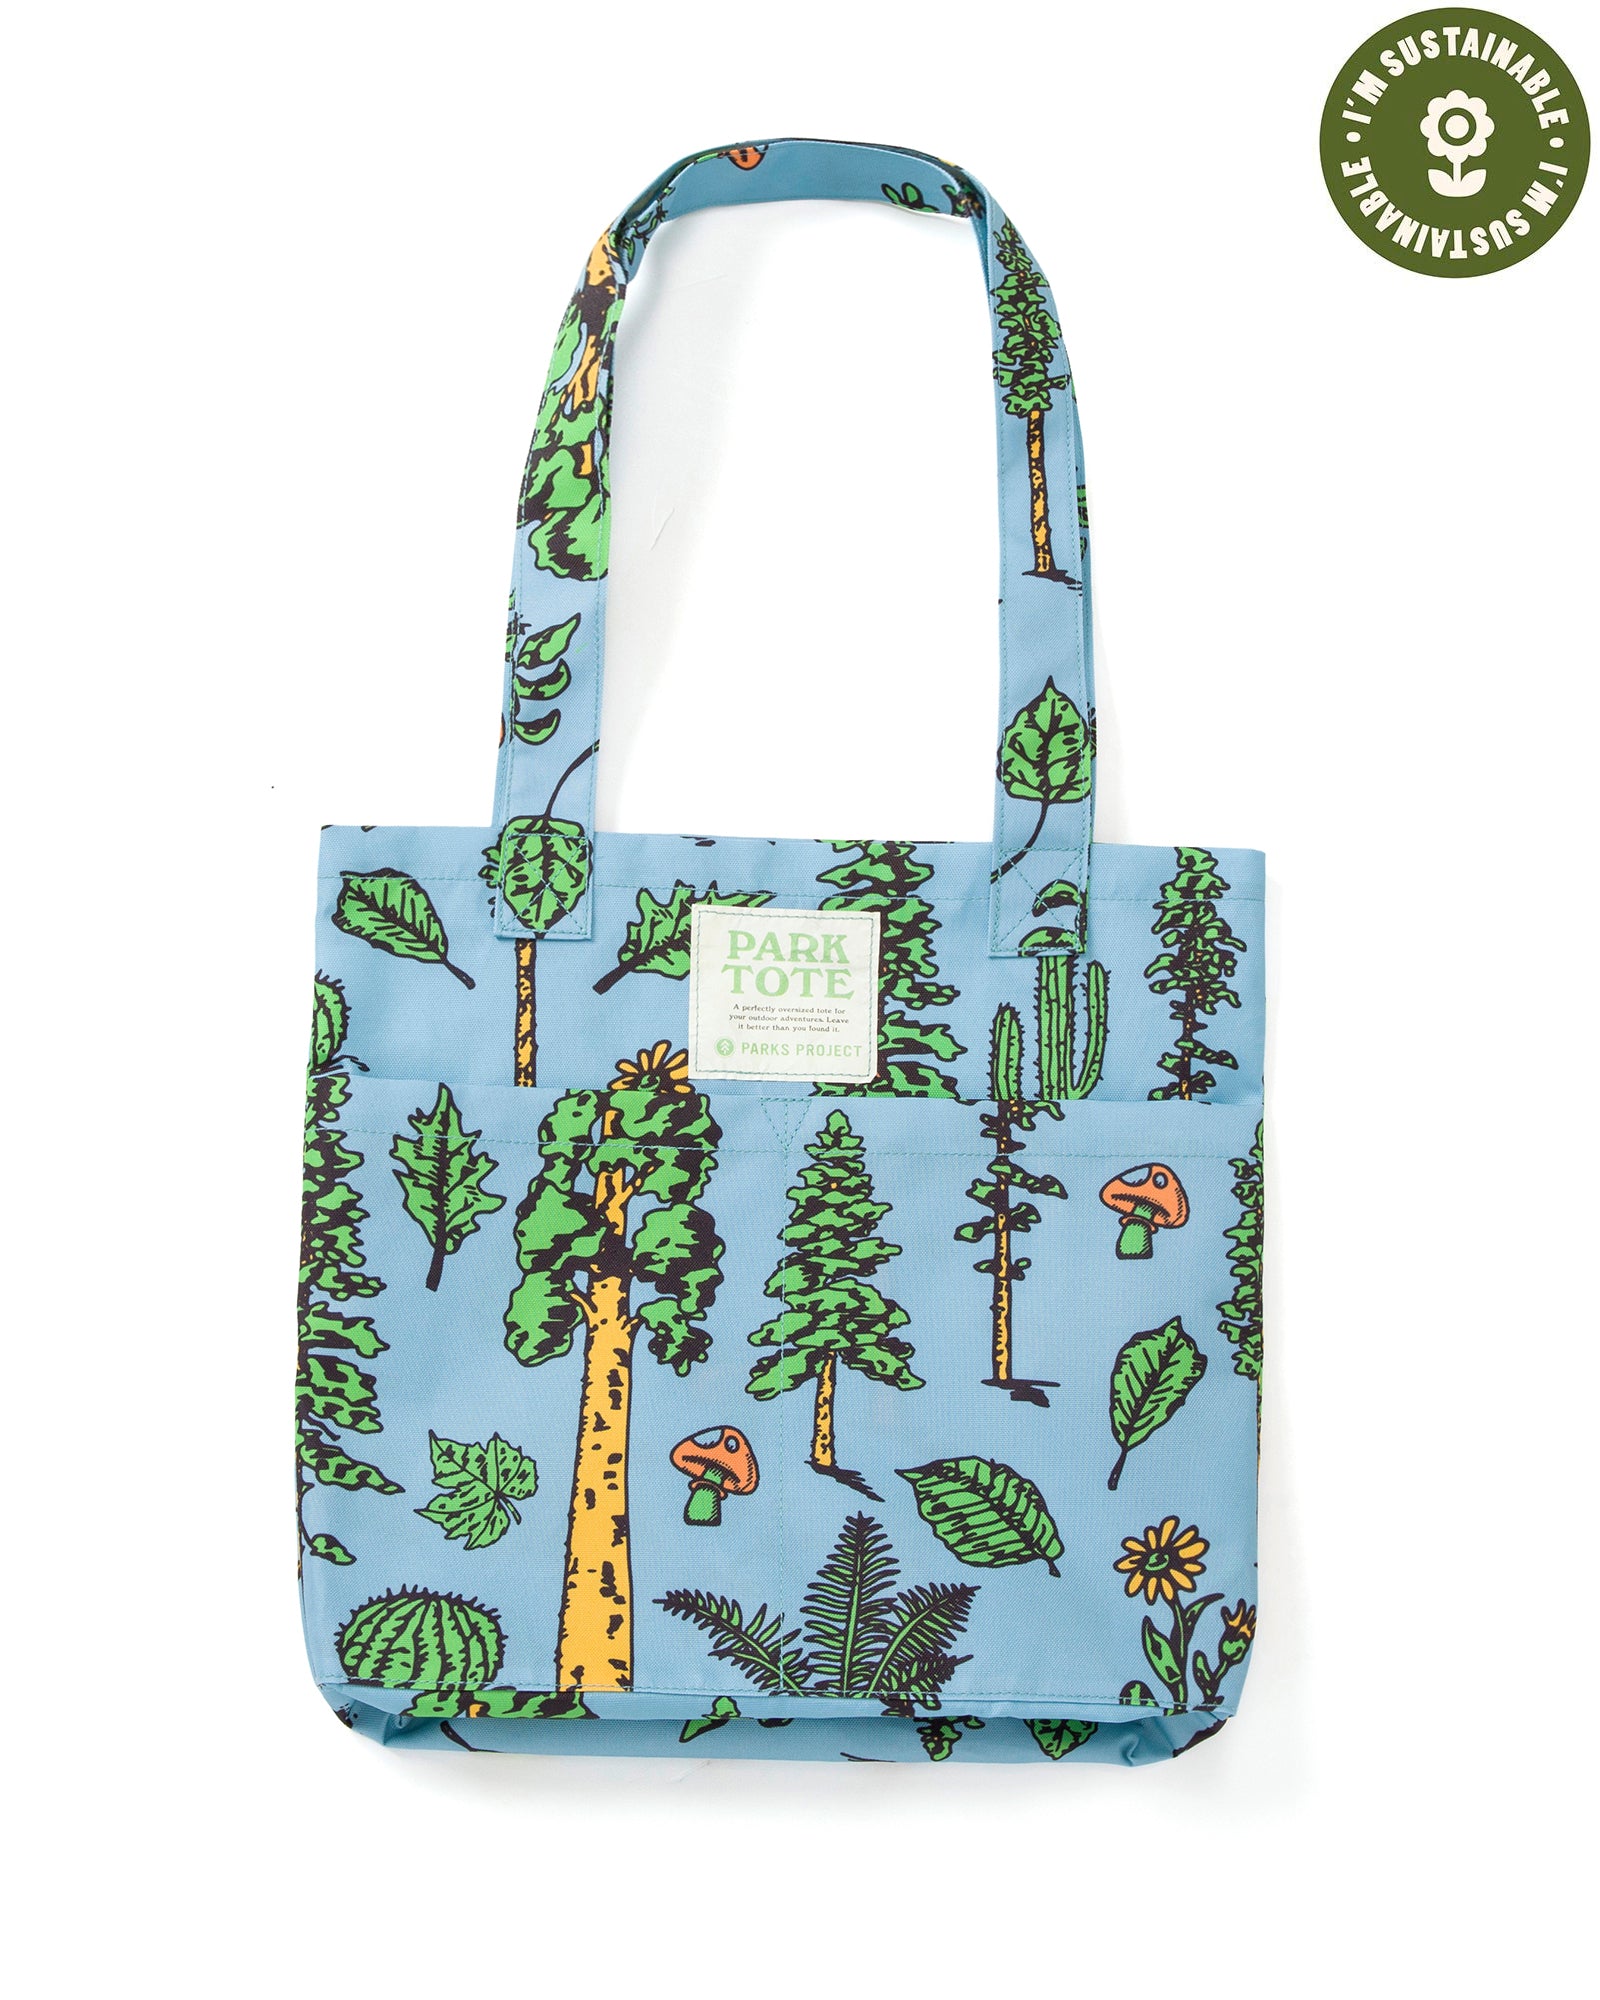 Shop Leave It Better Clean Up Kit Inspired by our National Parks – Parks  Project